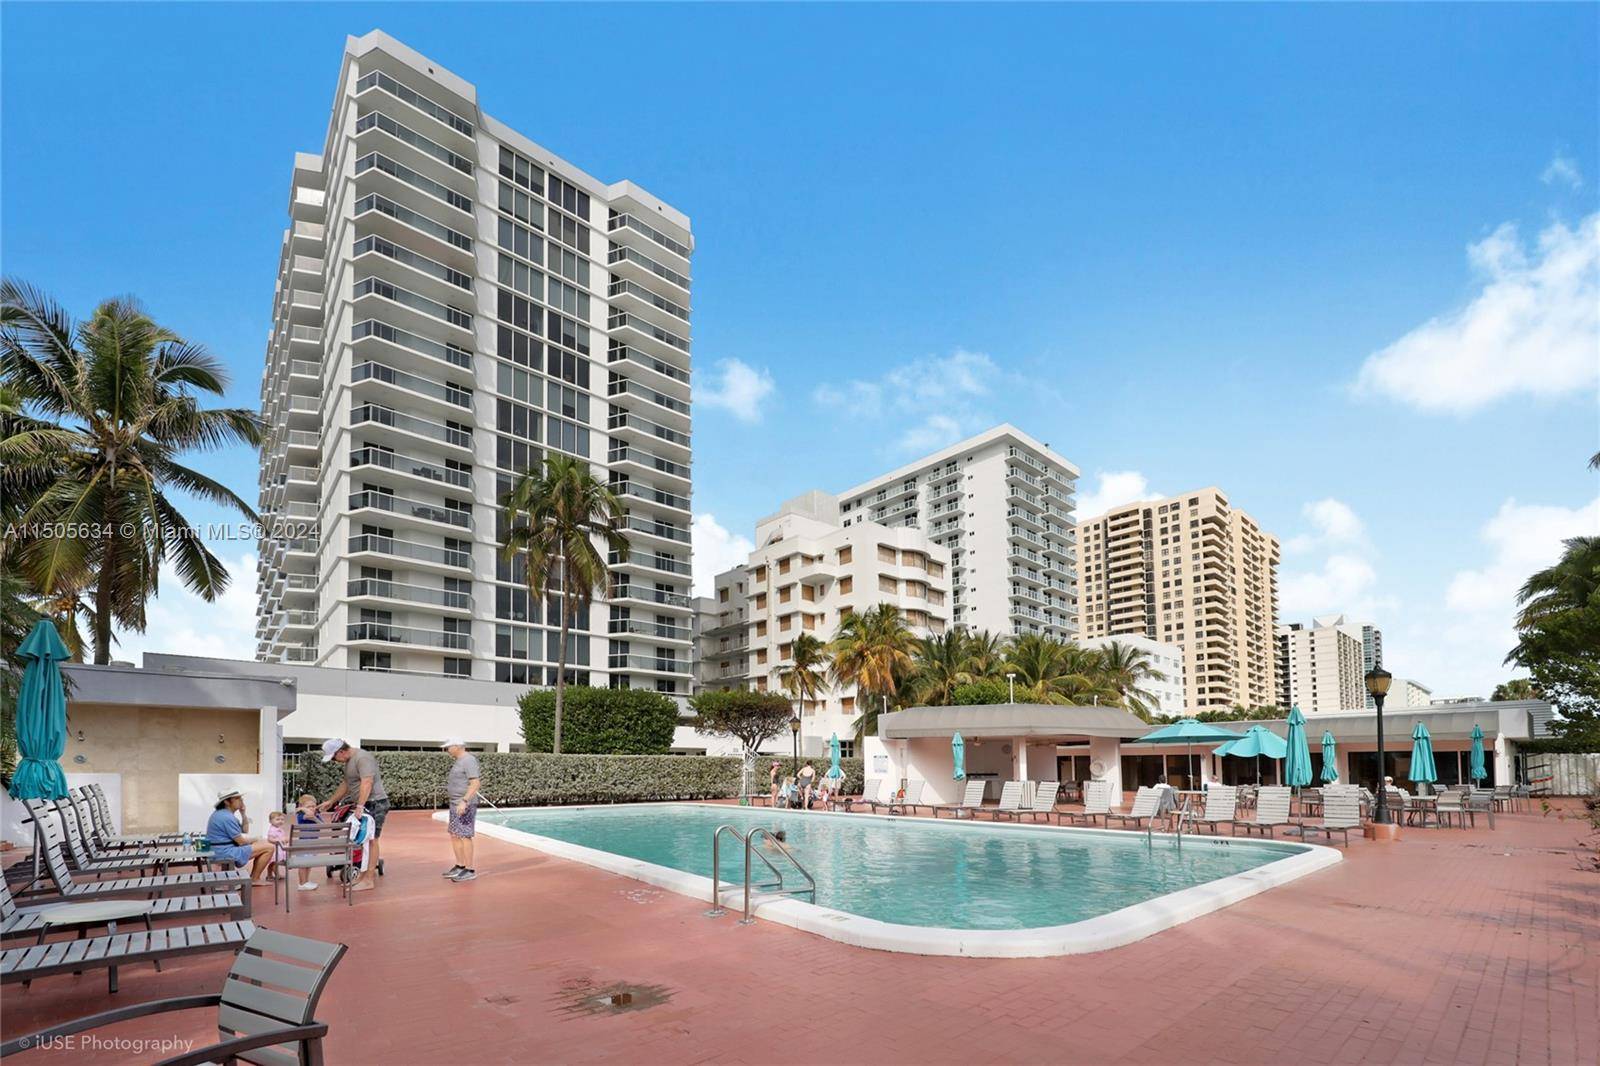 Introducing apartment 1109 at the Riviera Building This 2 bedroom, 2 bathroom unit offers breathtaking views of both the Atlantic Ocean and the Intracoastal Waterway from its expansive balcony.